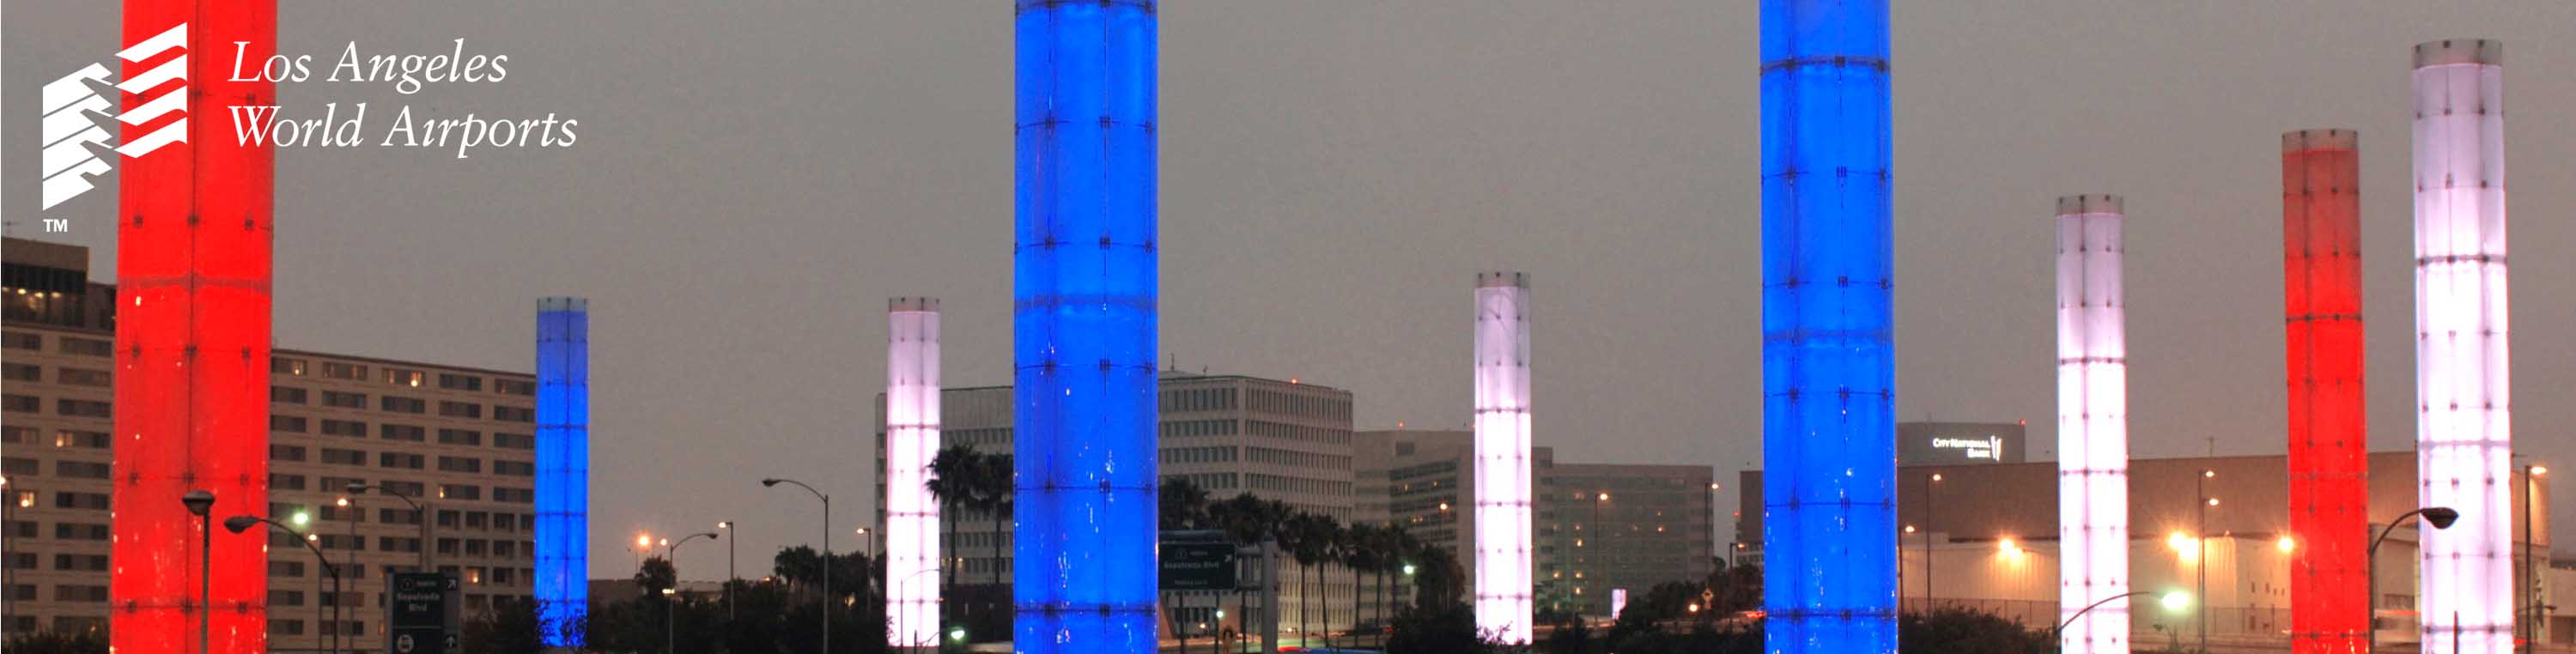 Photo of famous LAX Pillars each in red, white, or blue.